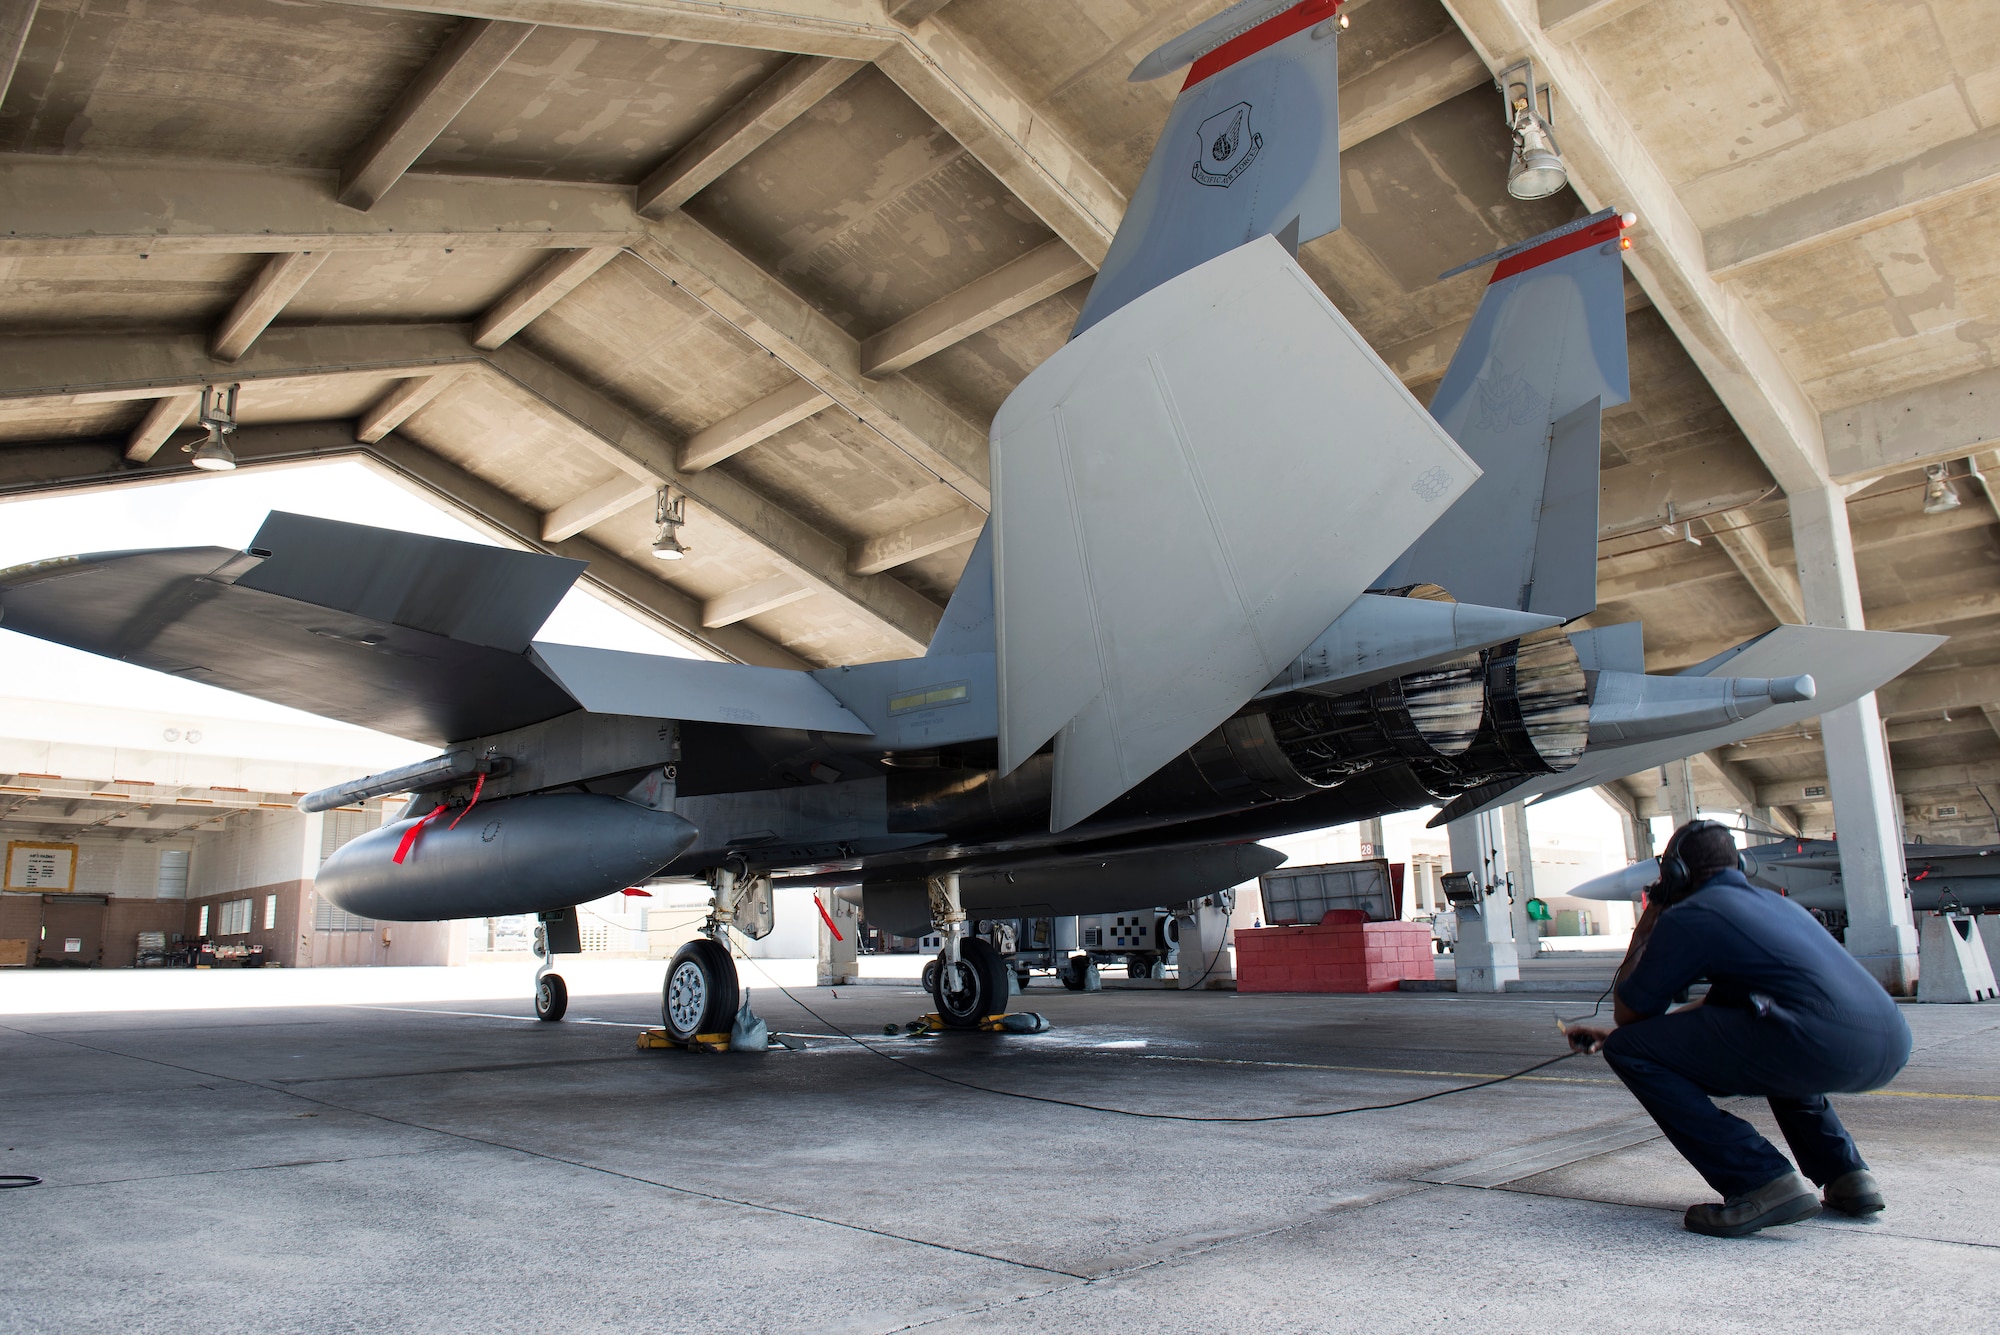 A U.S. Air Force F-15 Eagle crew chief from the 67th Aircraft Maintenance Unit watches pre-flight procedures and communicates with the aircraft's pilot before takeoff on Kadena Air Base, Japan, Sept. 16, 2014. Sept. 29, 2014, marks the 35th anniversary of the F-15C's arrival to Kadena. With a perfect record of more than 100 confirmed kills and no combat losses in operations and contingencies ranging from Turkey and Bosnia to Iraq and Afghanistan, the Eagle has proven itself time and again. (U.S. Air Force photo by Senior Airman Maeson L. Elleman/Released)